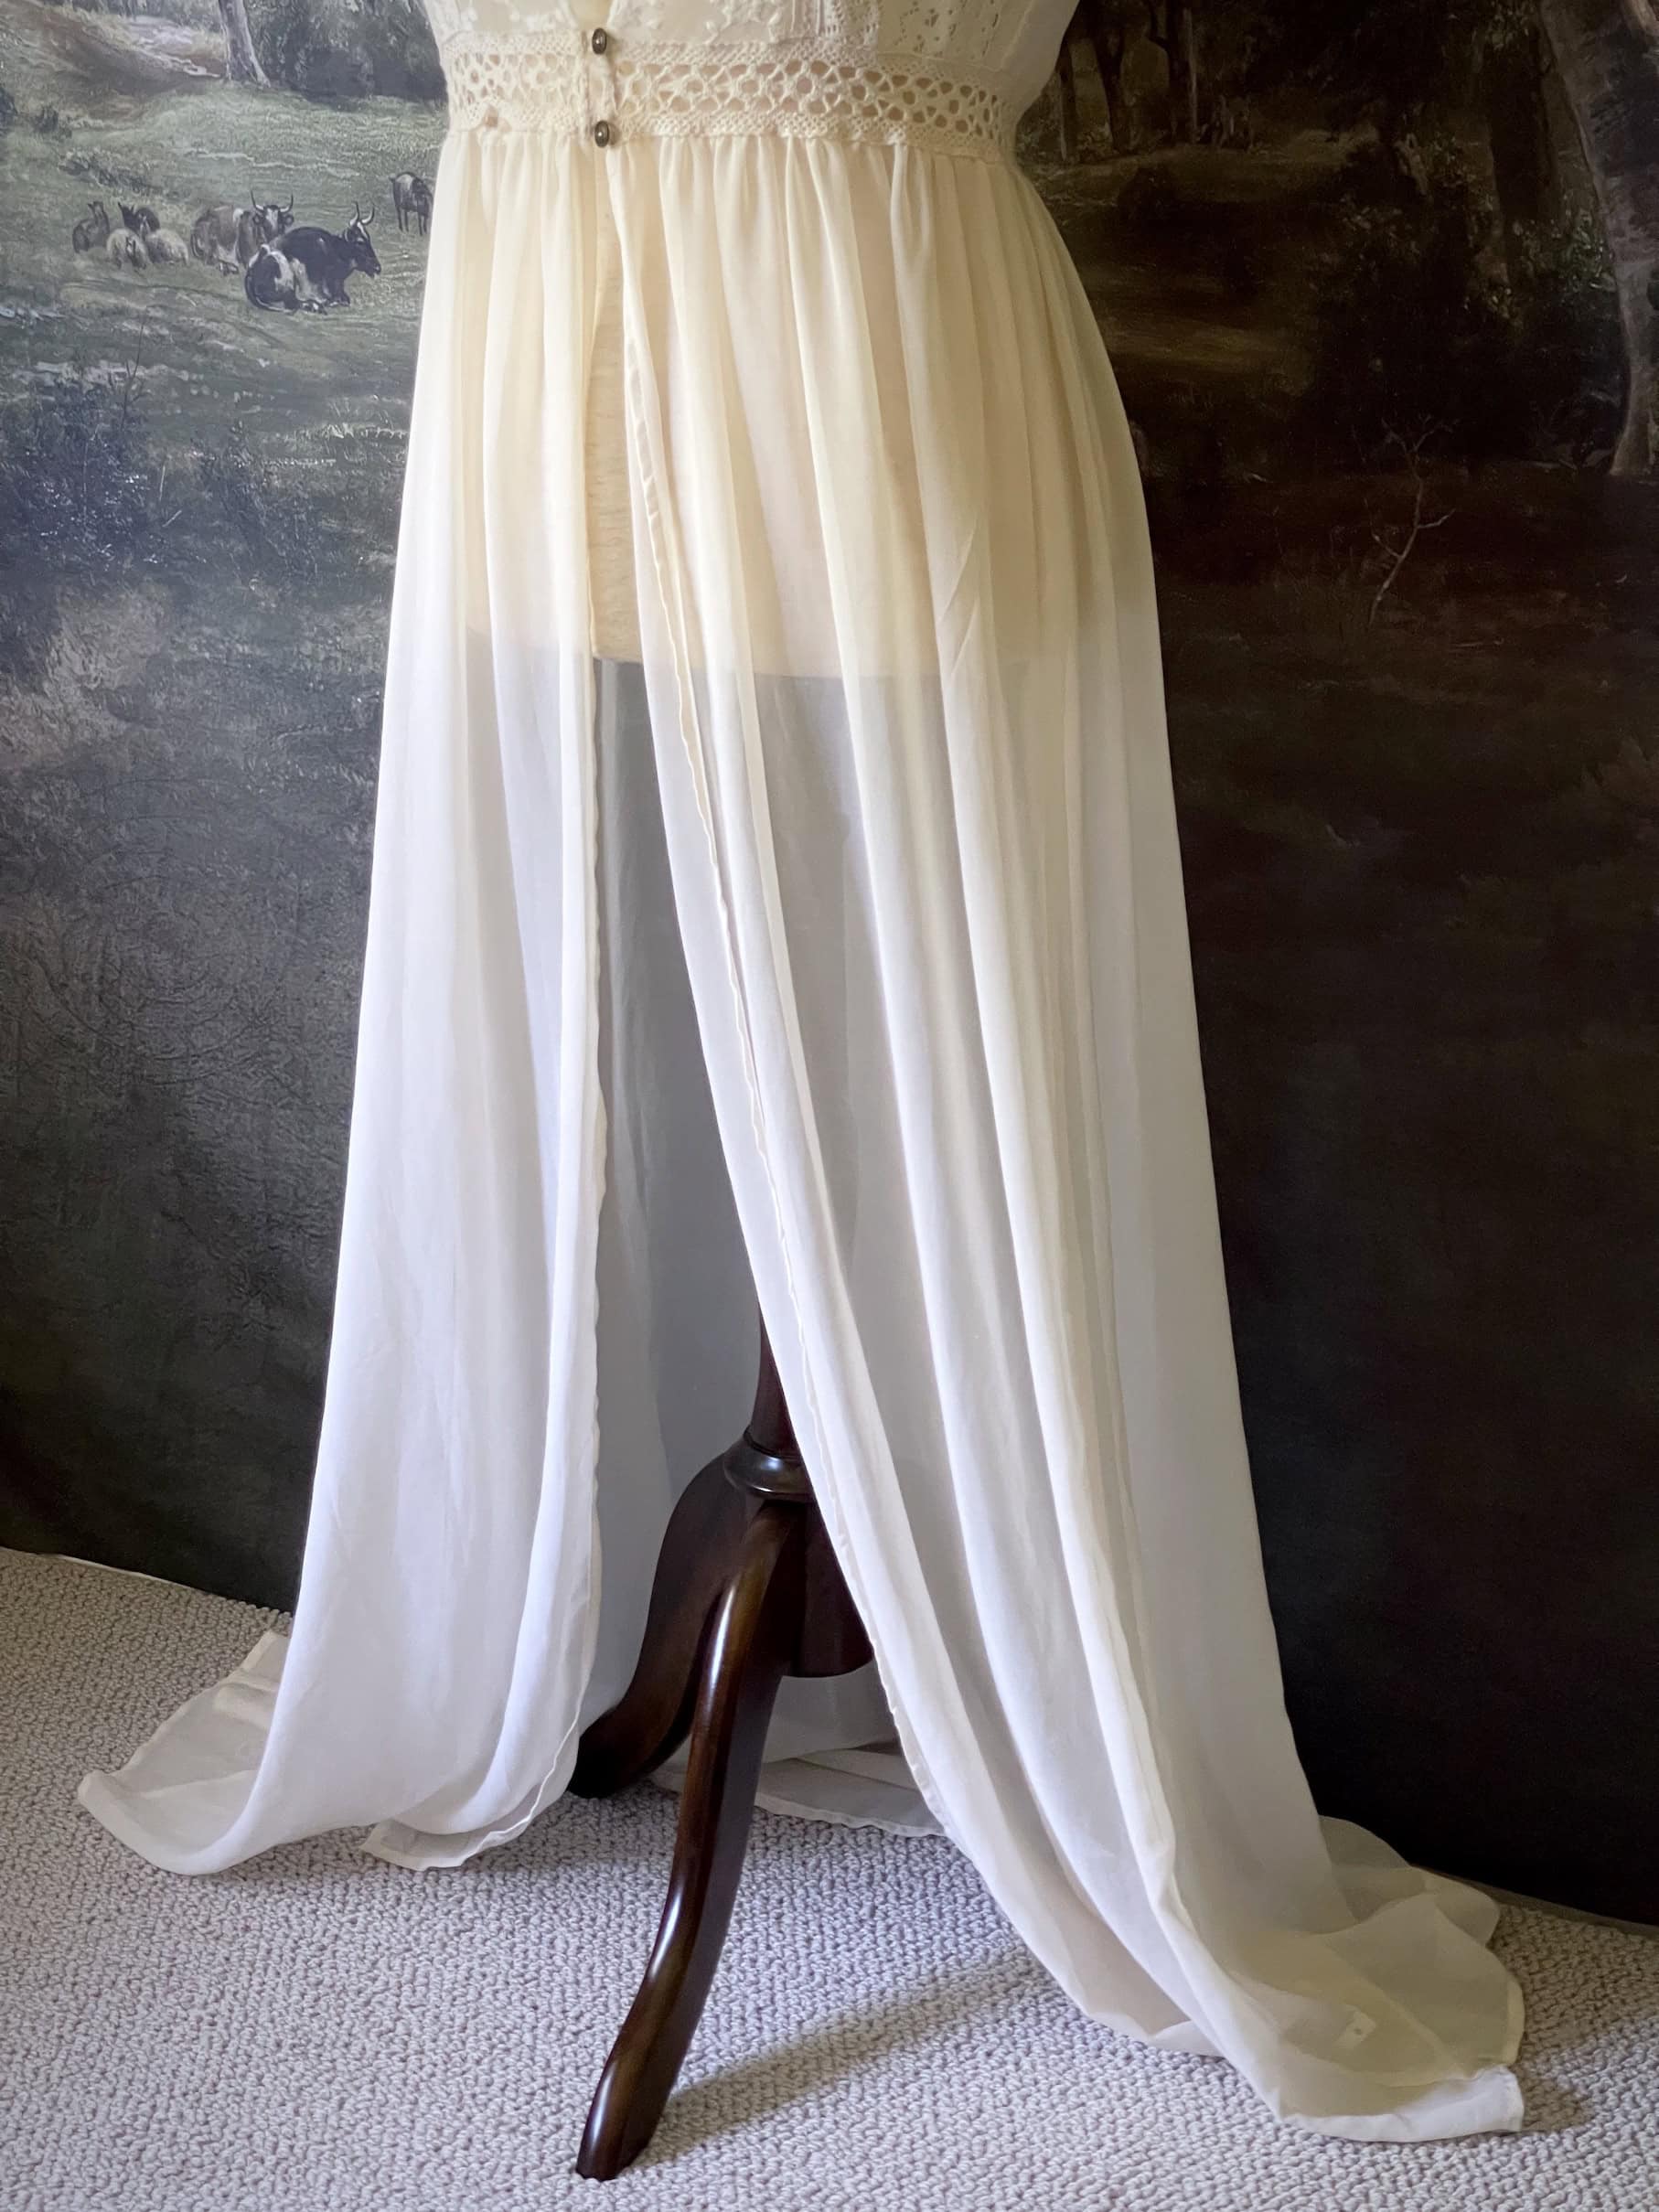 A historically inspired Edwardian era Ivory maxi Overdress with Floral Lace Details is pictured on a mannequin in front of an art history backdrop.